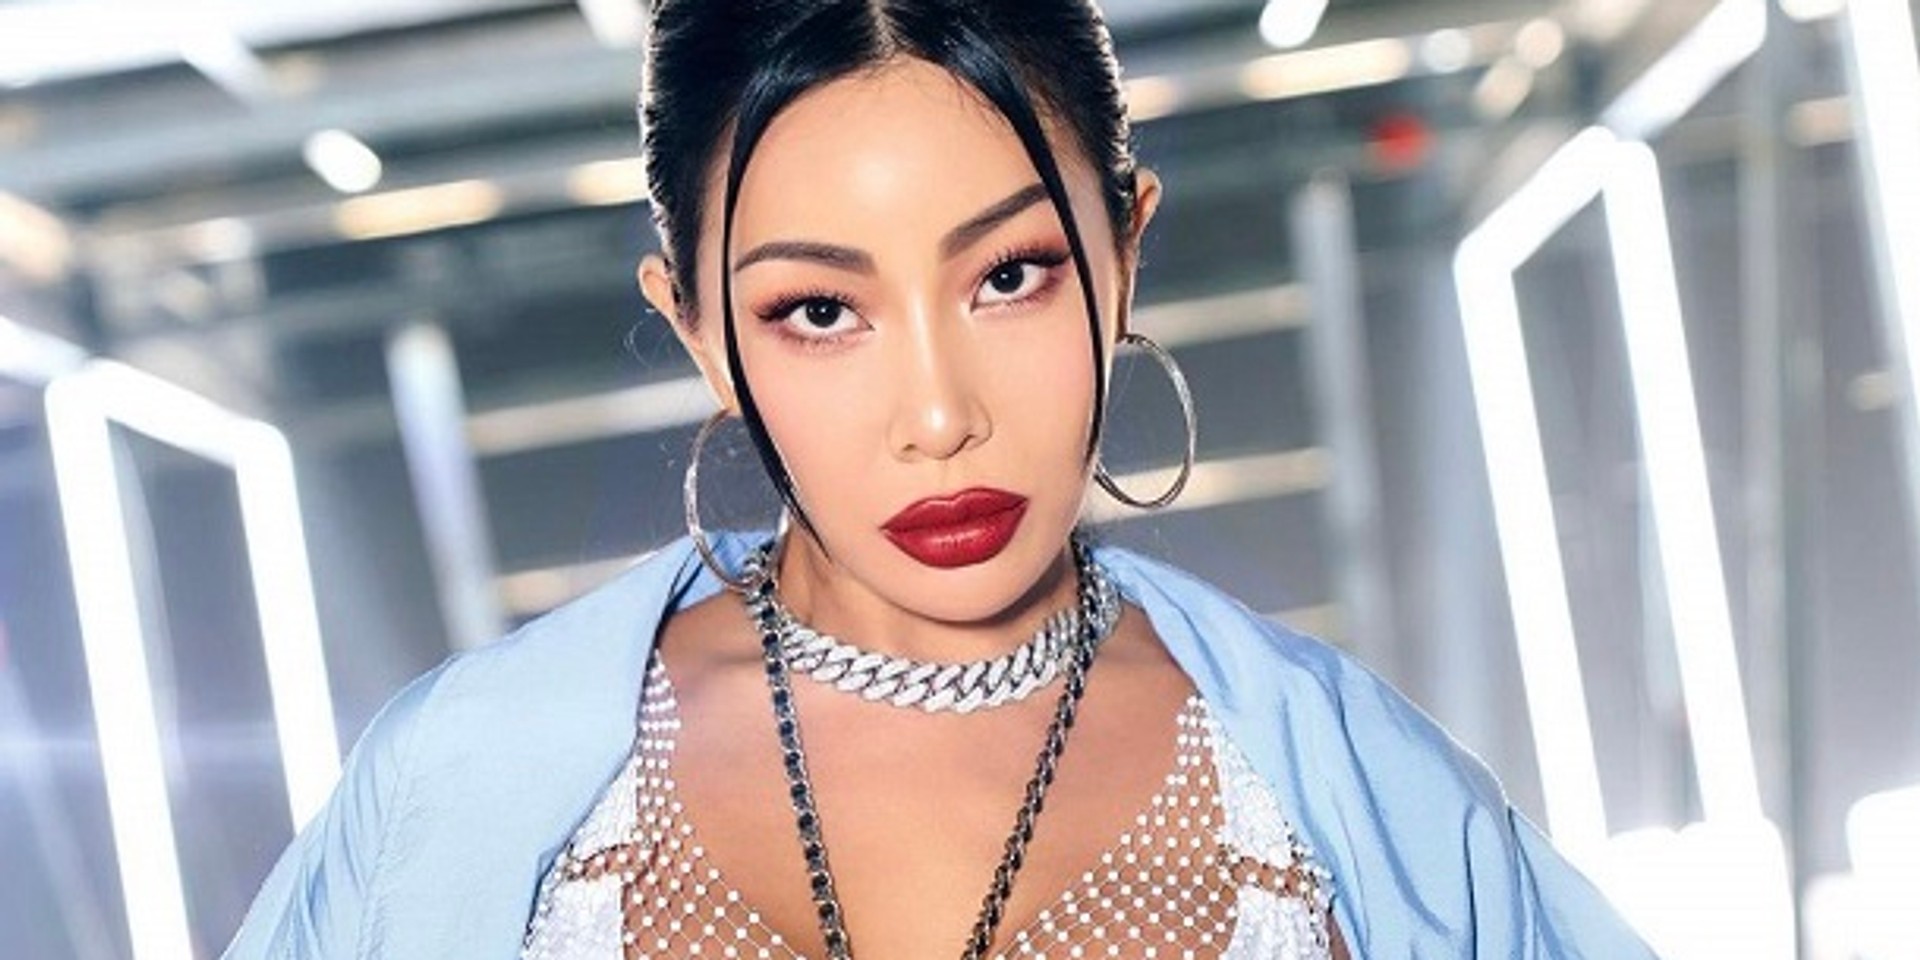 Jessi is hosting a digital performance this March, here's how to get tickets